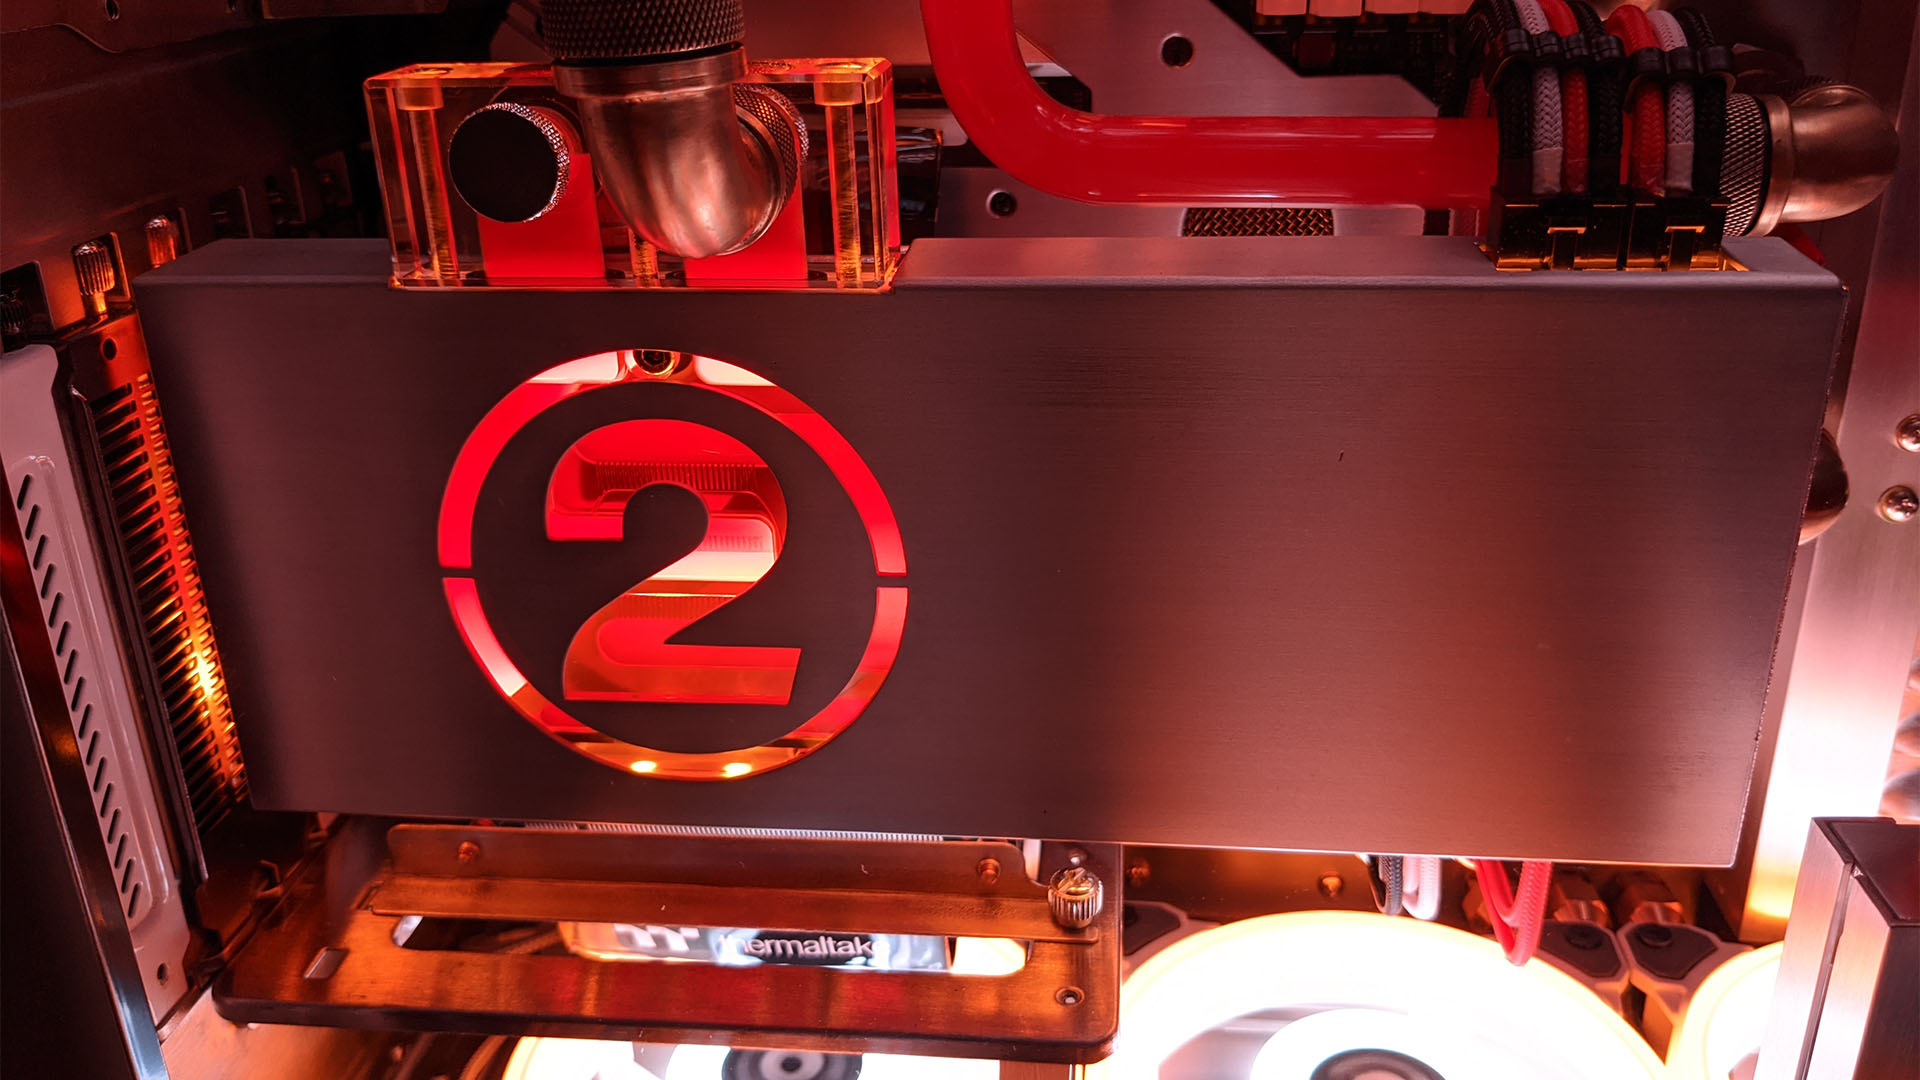 The water block with a carved 2 in it for The Division 2